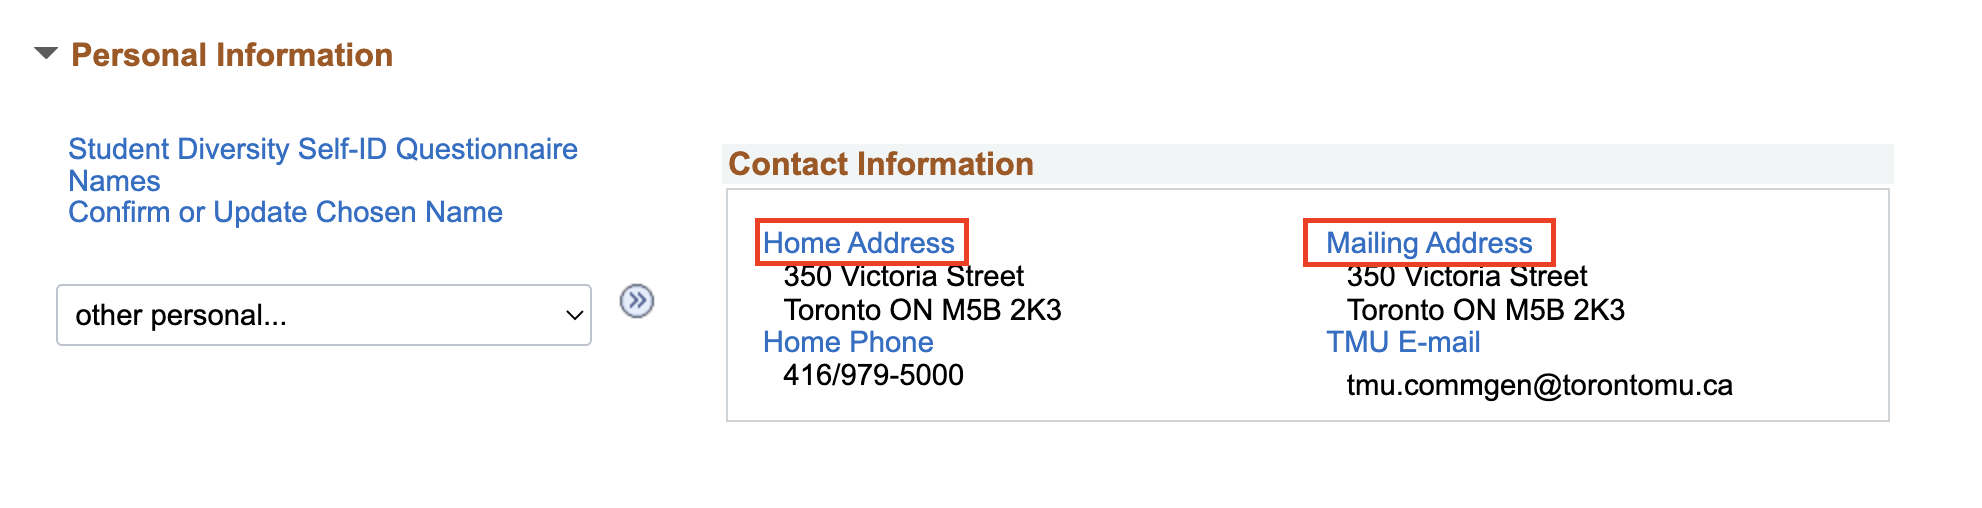 Home Address and Mailing Address quick links on Personal Information section of MyServiceHub.